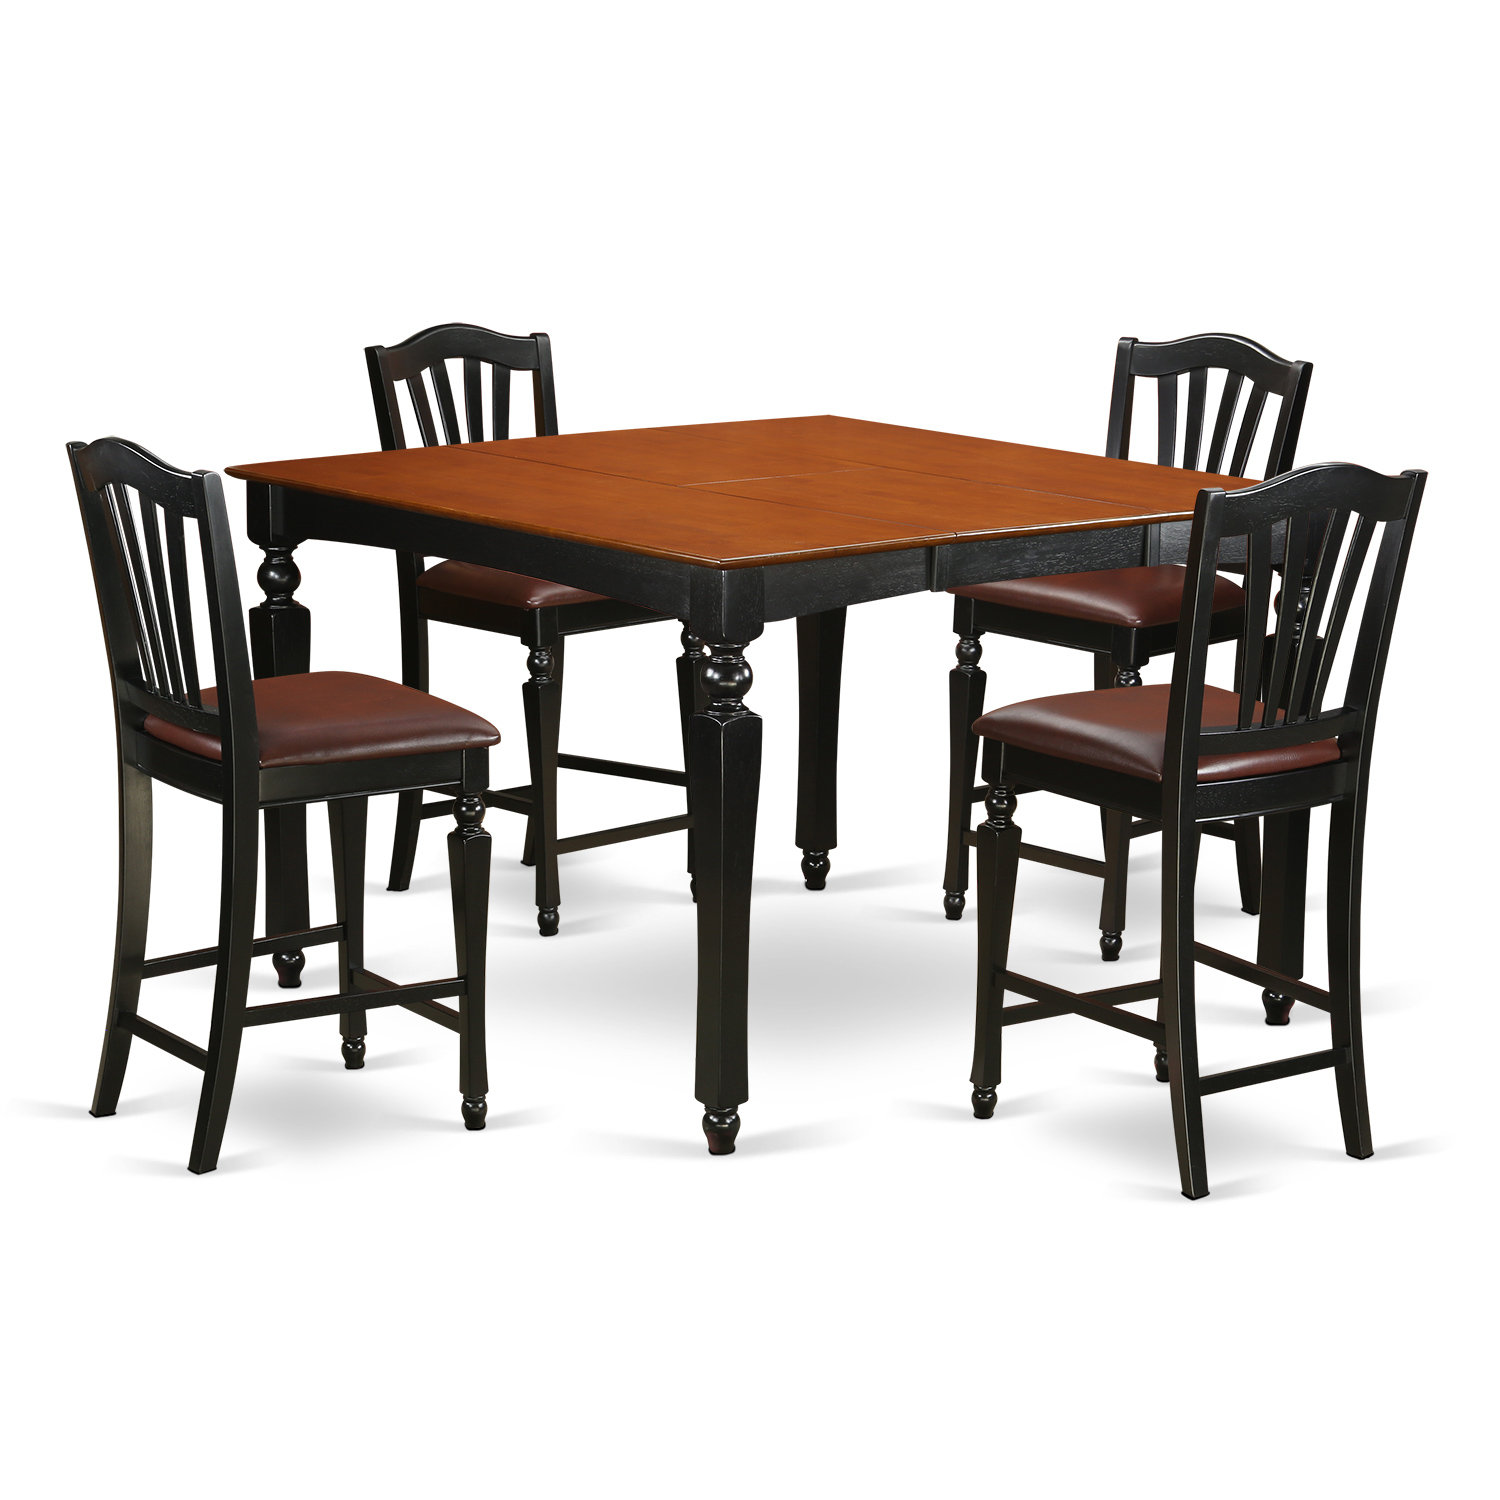 Darby Home Co Ashworth 5 Piece Counter Height Butterfly Leaf Solid Wood Dining Set Reviews Wayfair